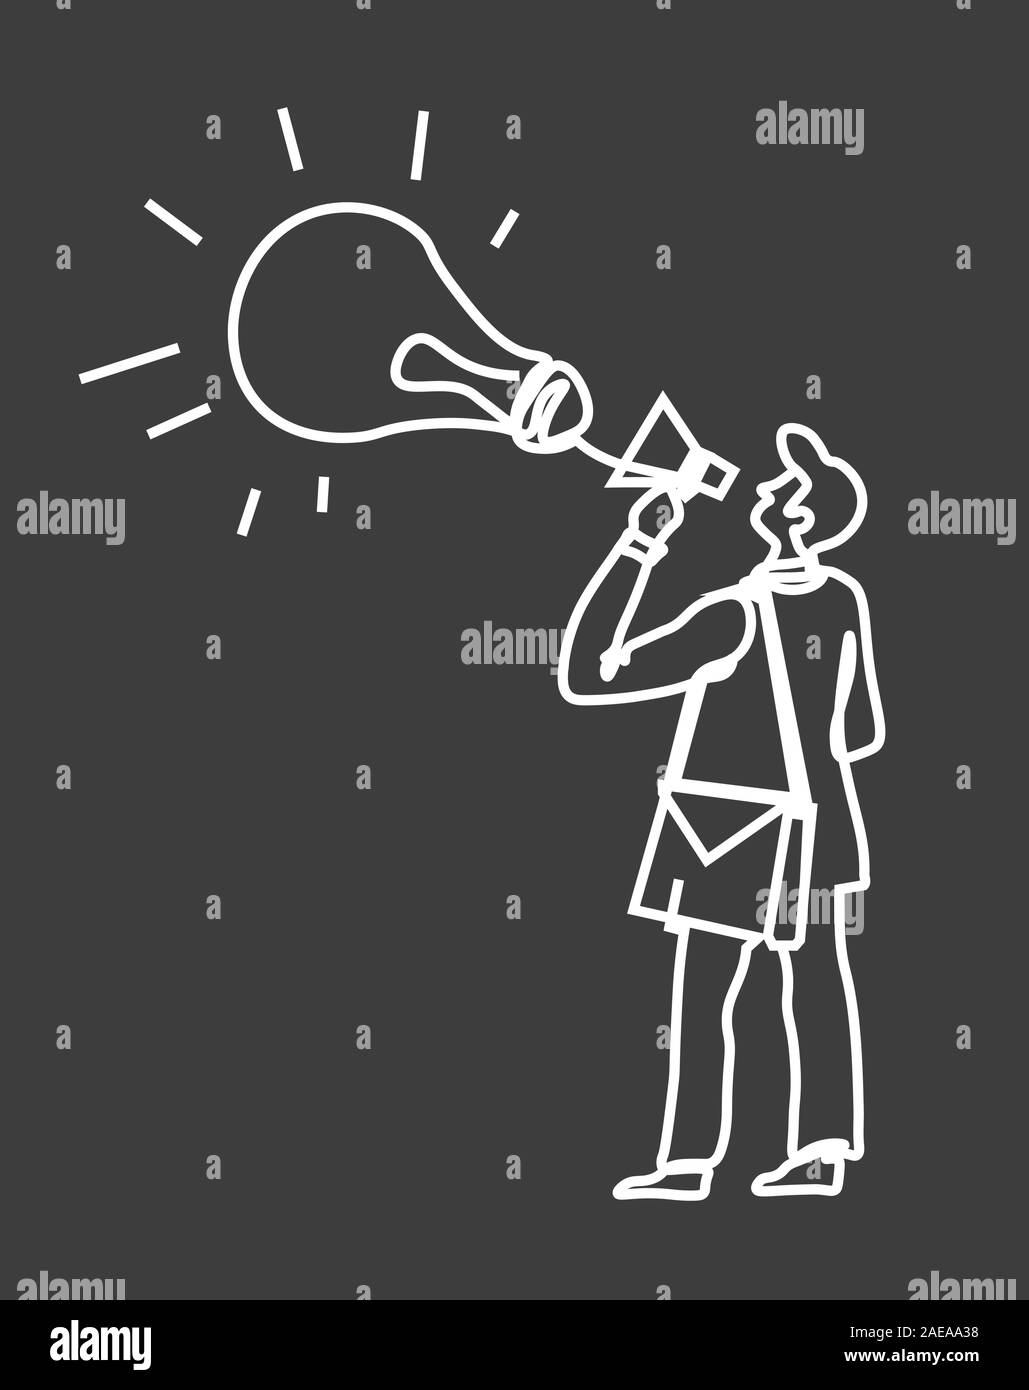 Man in suit with loudspeaker and lightbulb icon doodle sketch Stock Vector